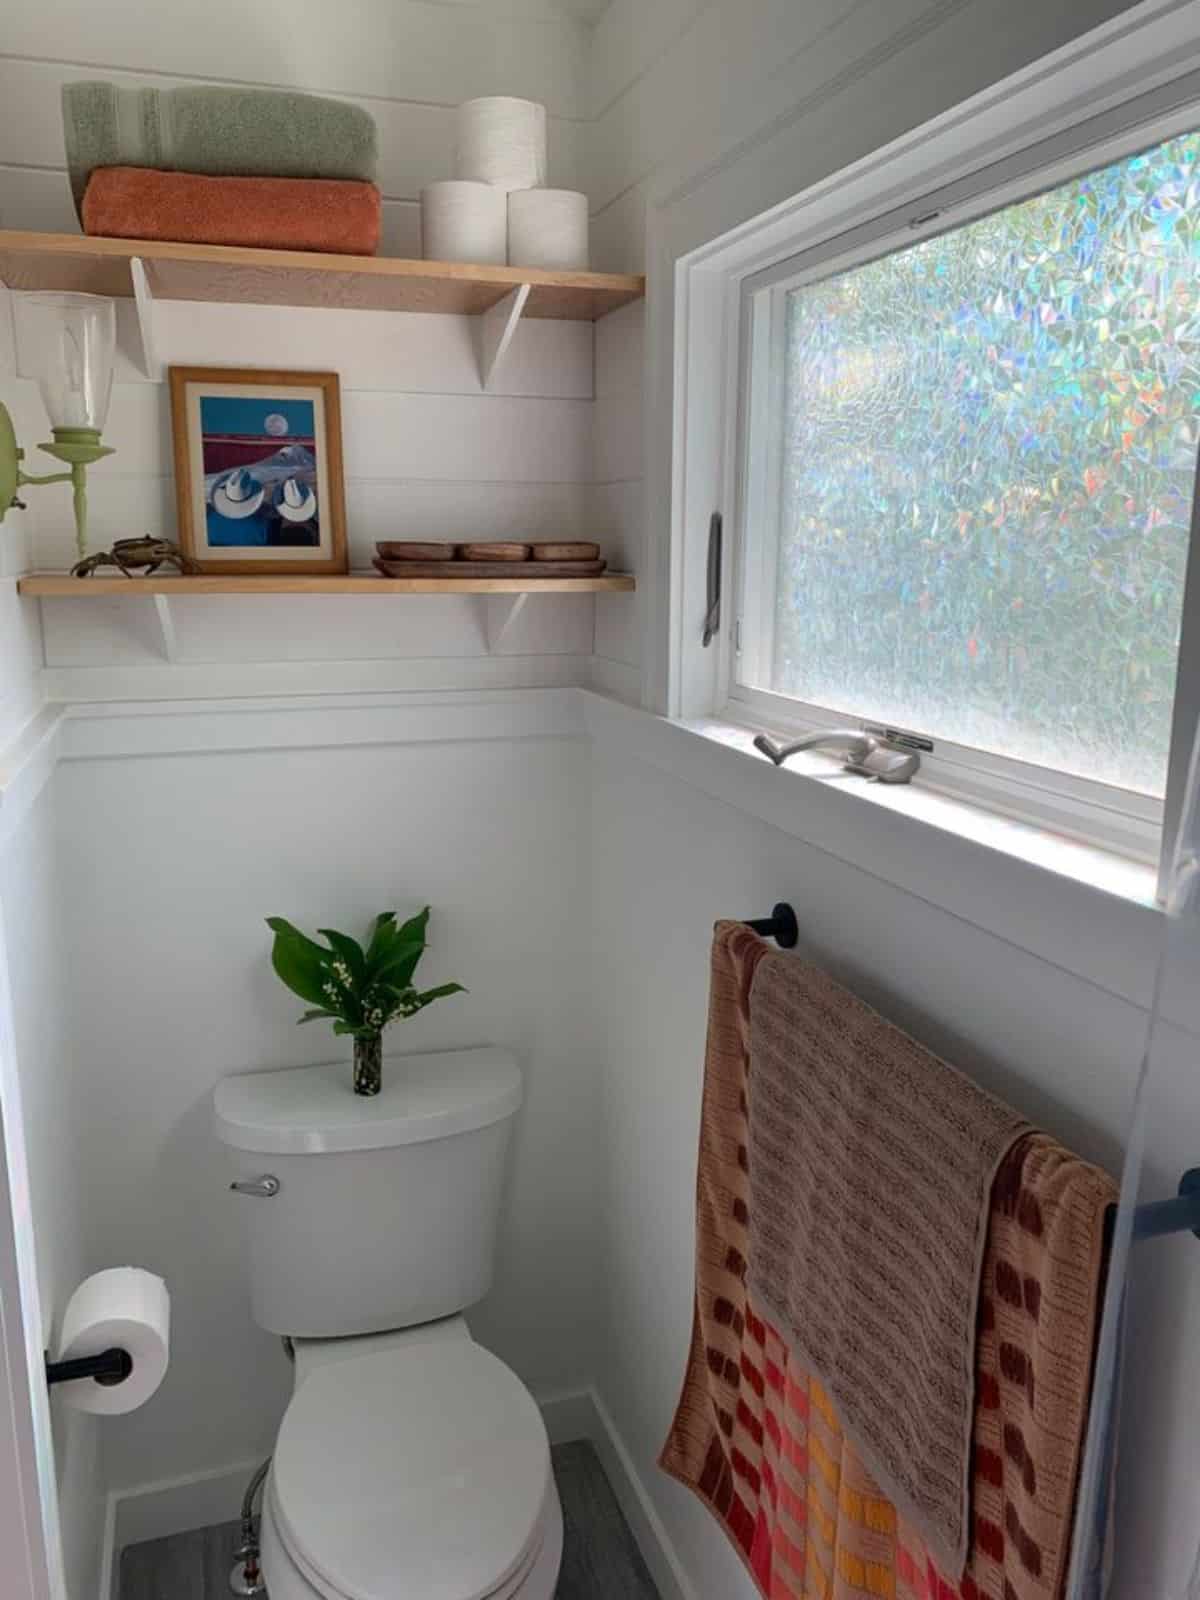 bathroom of Brand new tiny home has all standard fittings with wall mounted shelves